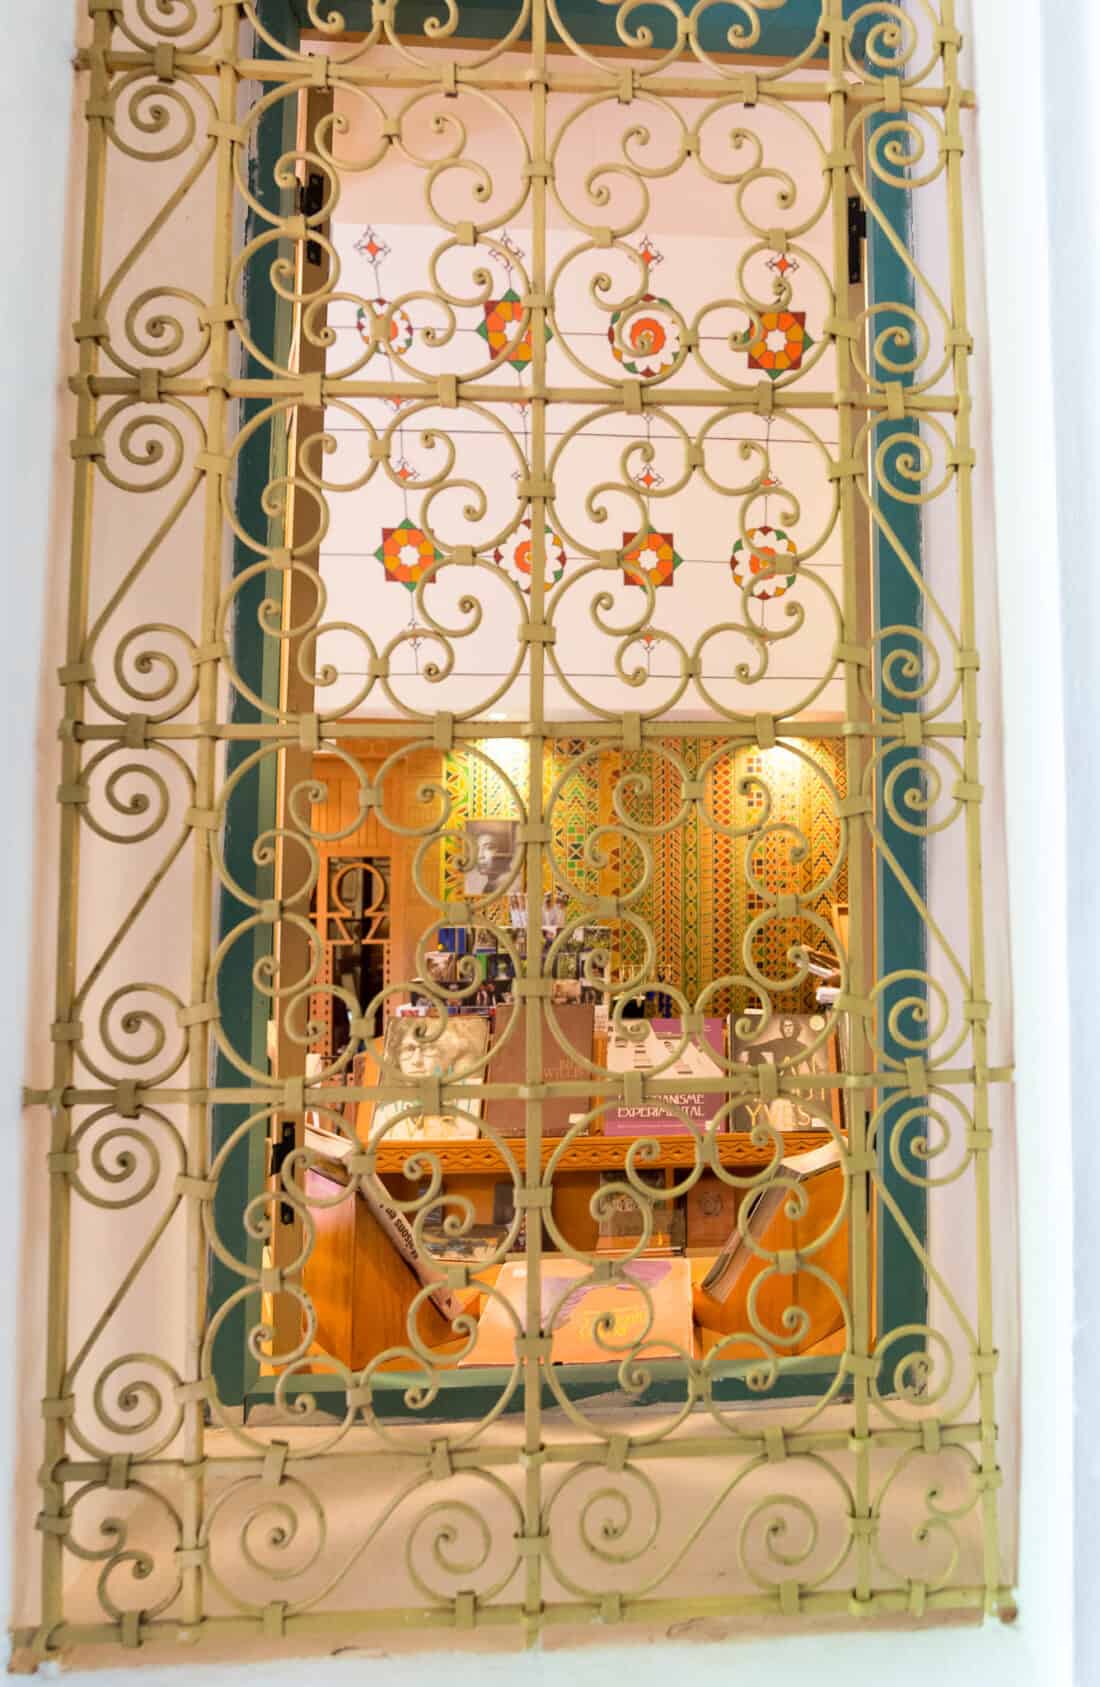 An ornate metal grille with floral patterns, reminiscent of the Majorelle Garden, in front of a window, behind which a person is partially visible.